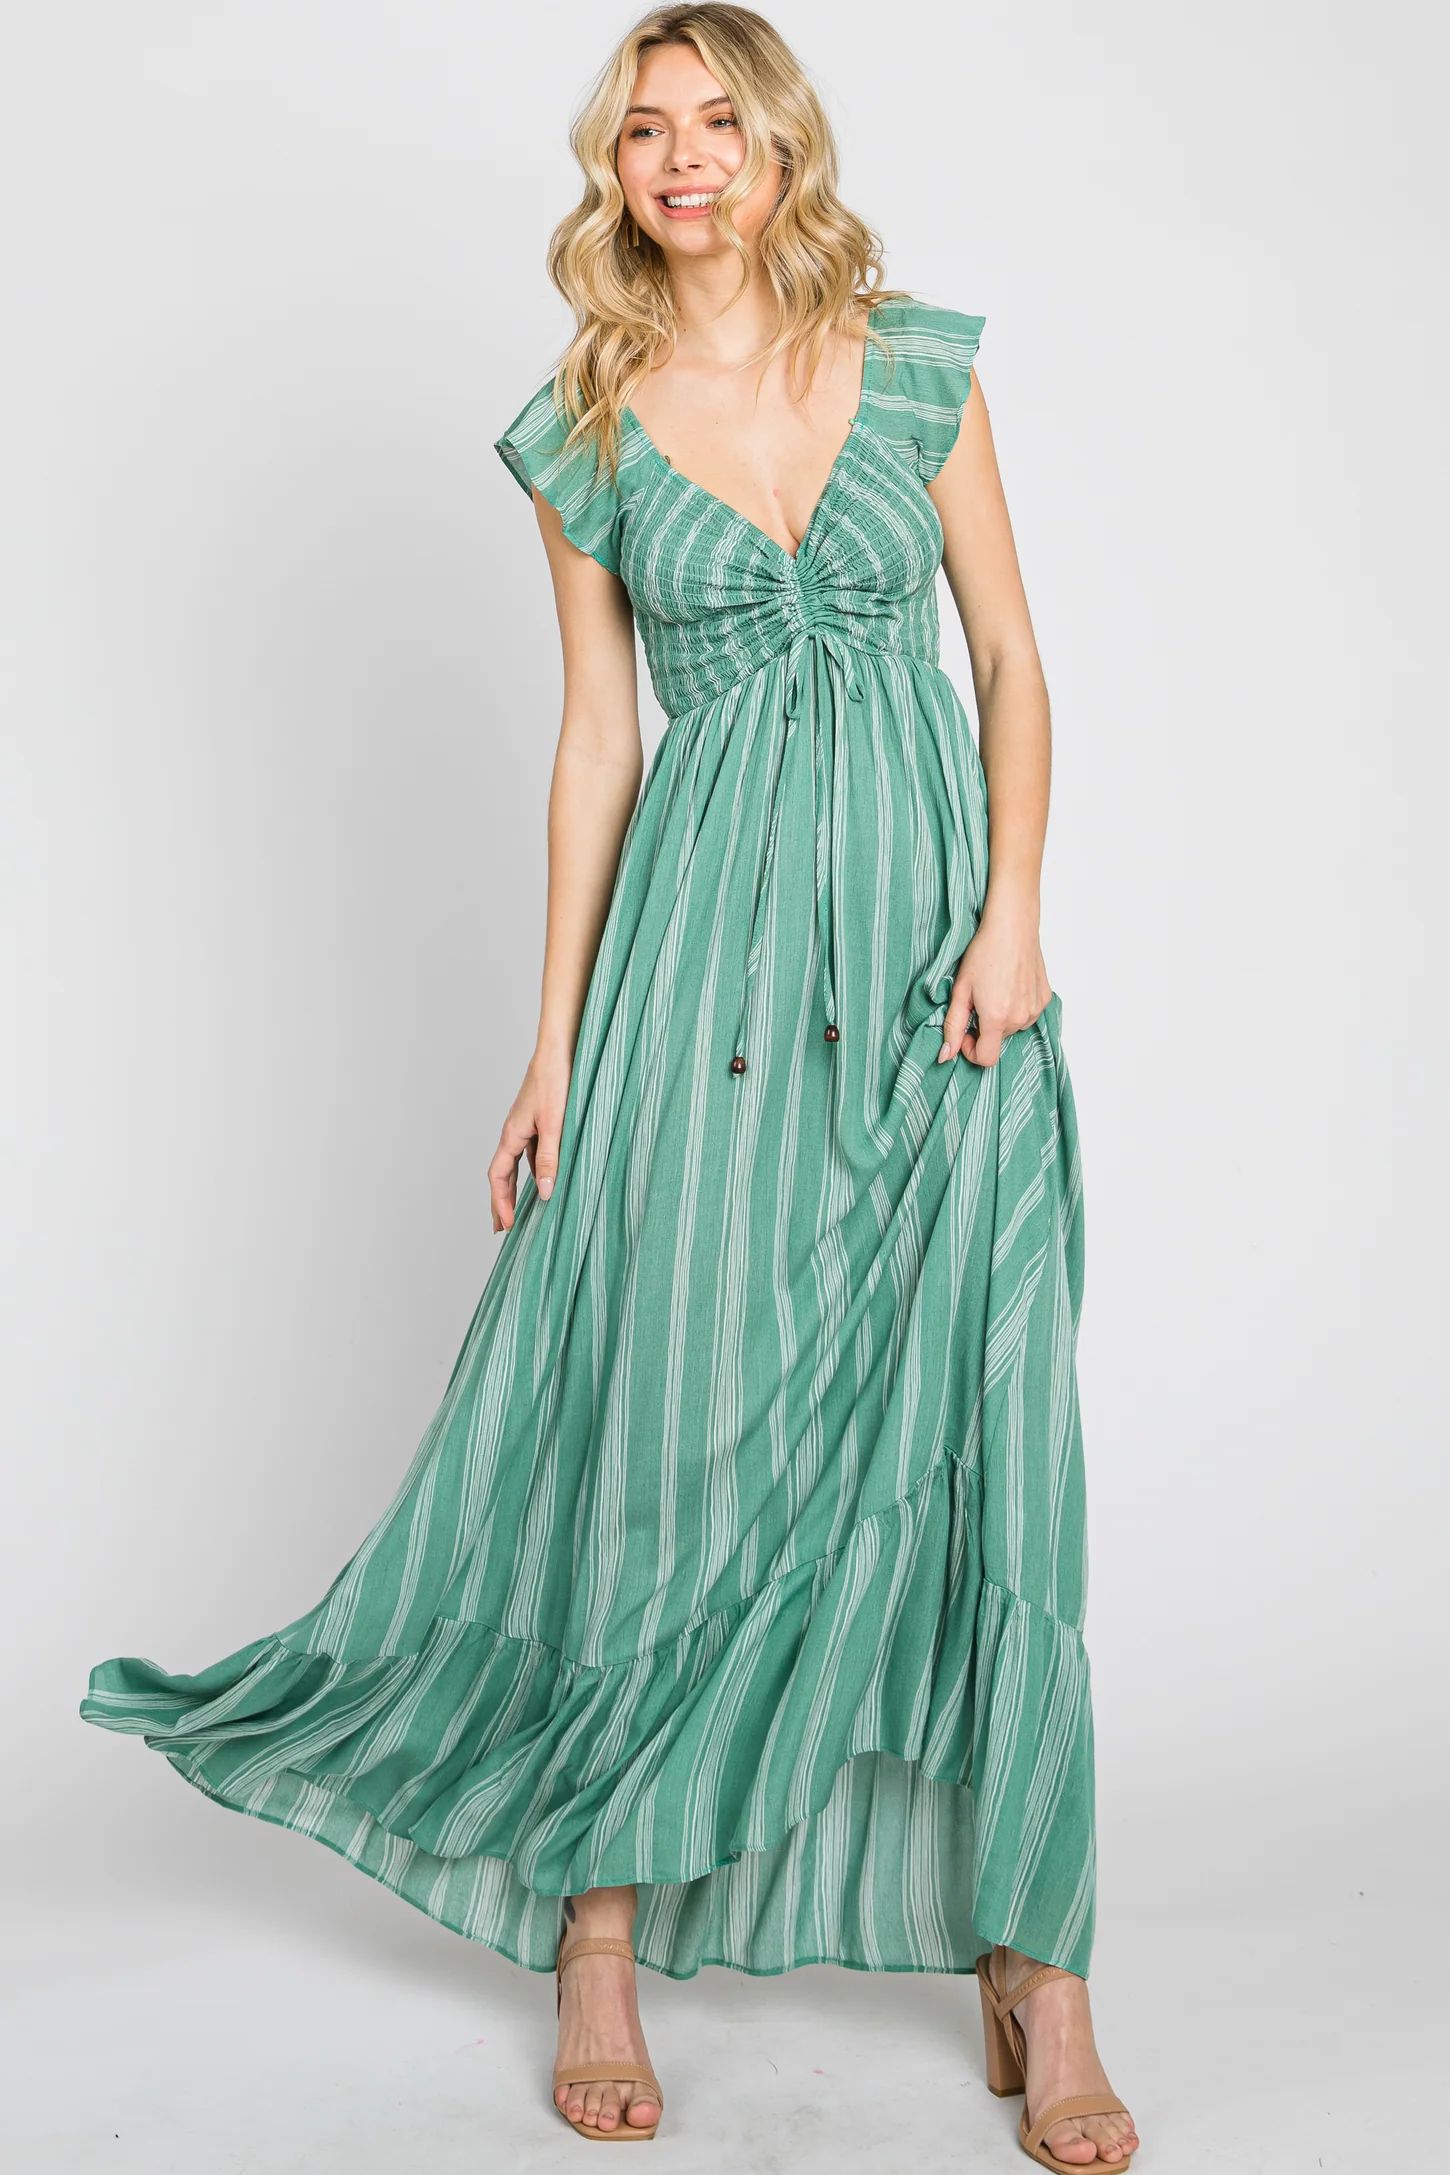 Green Striped Off Shoulder Front Tie Maxi Dress | PinkBlush Maternity